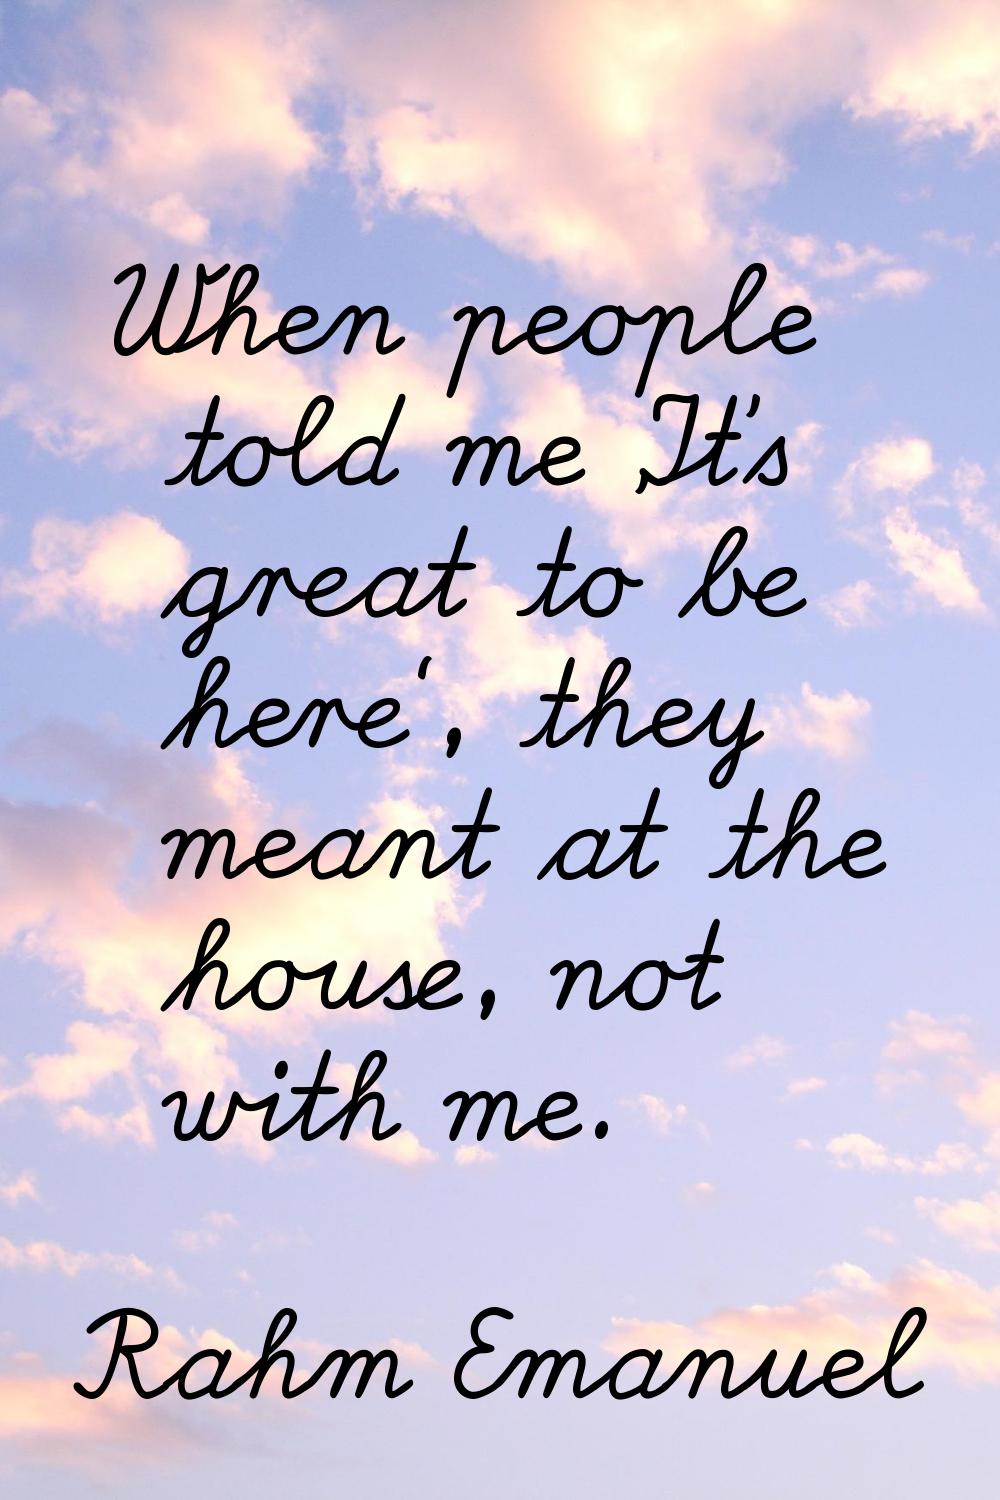 When people told me 'It's great to be here', they meant at the house, not with me.